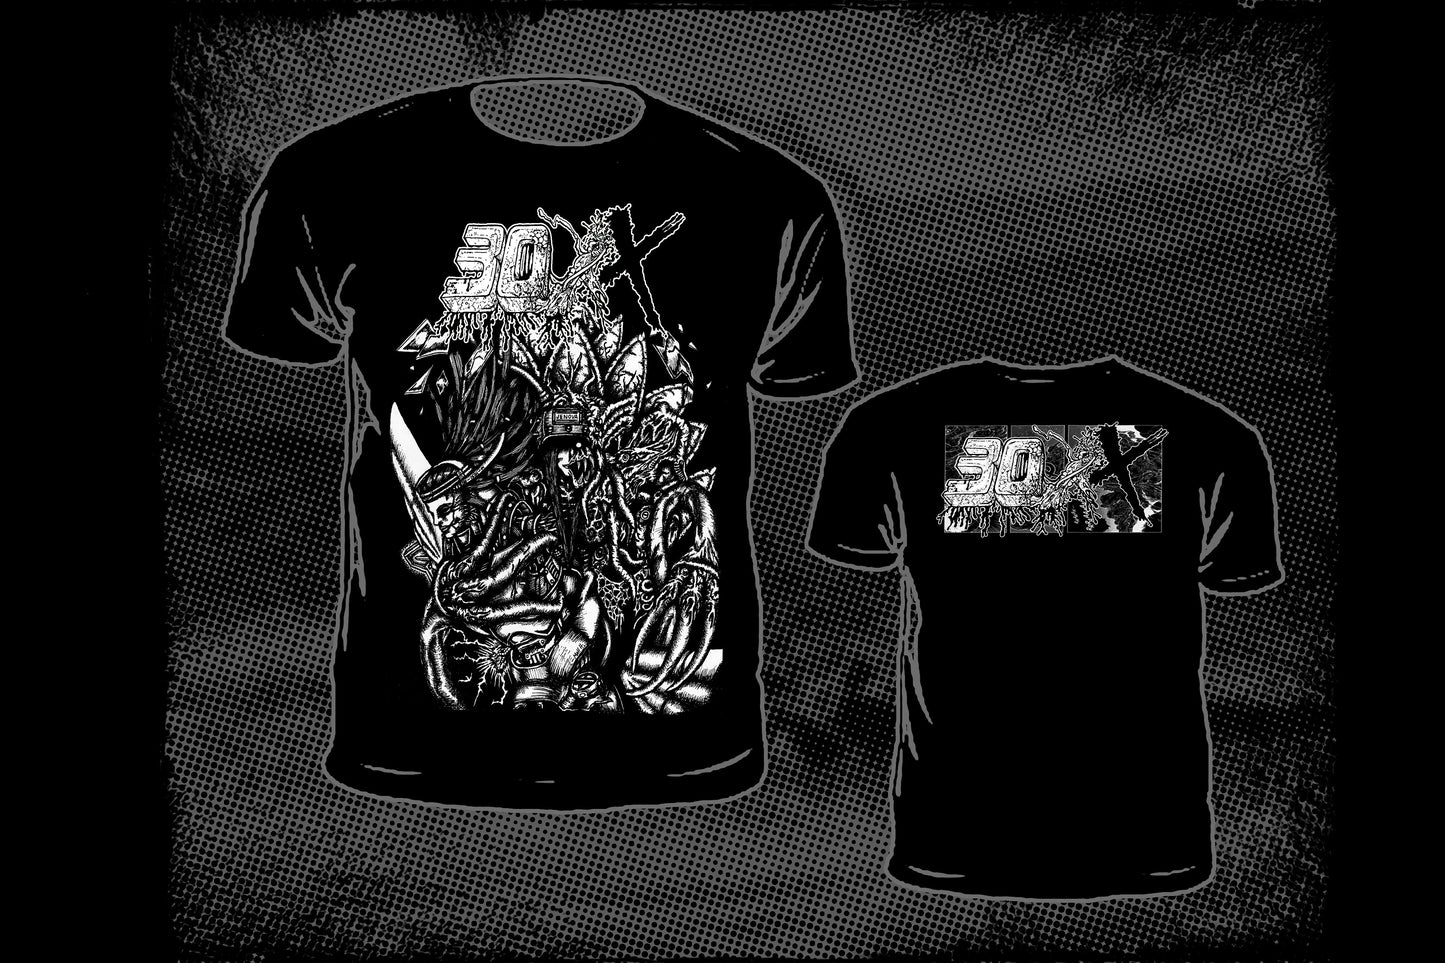 30XX - This Is My Final Form - Tshirts